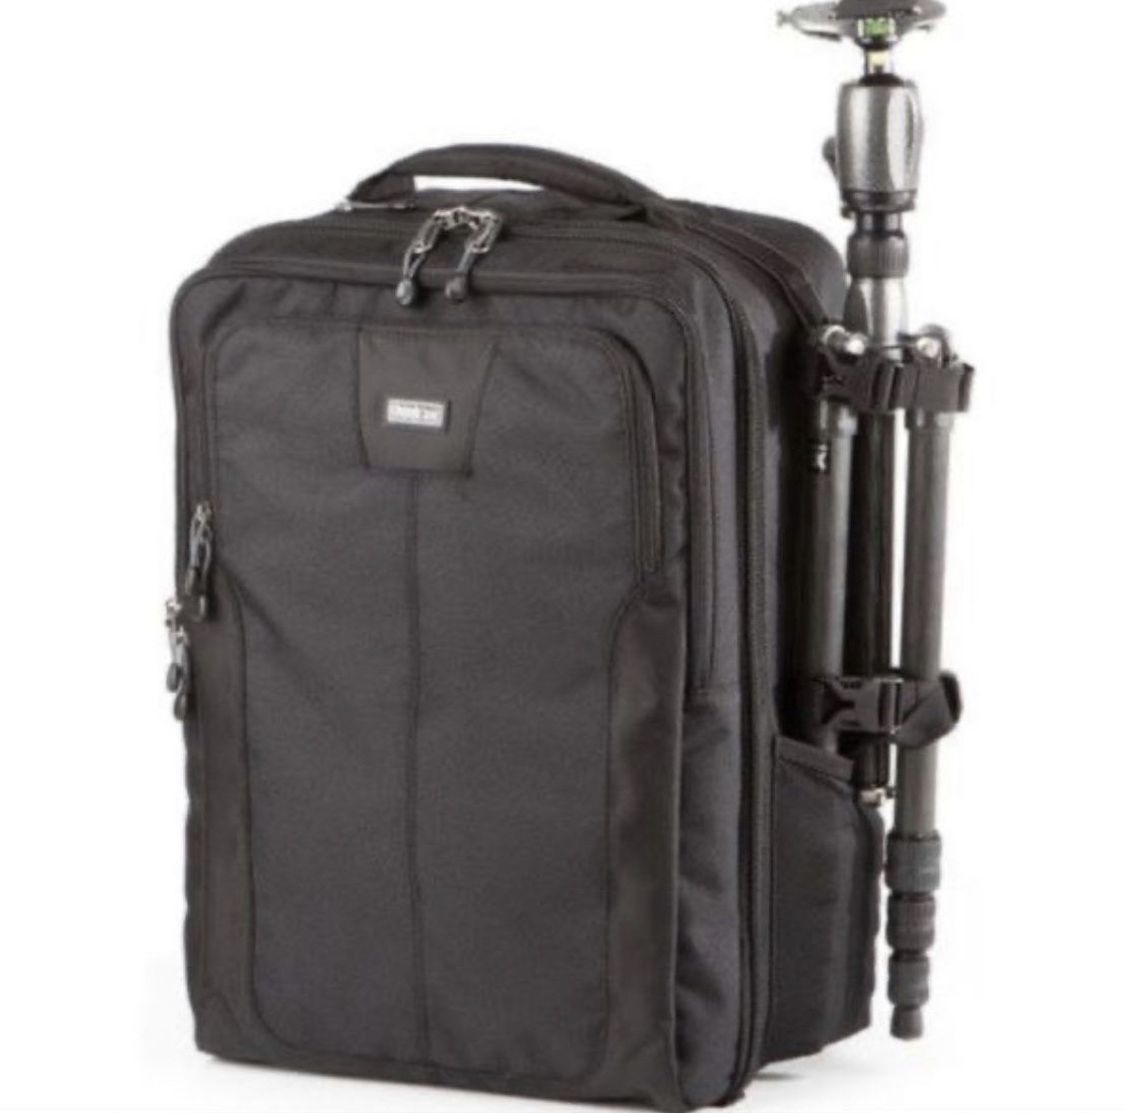 Backpack for Camera Photo Think Tank Airport Commuter NEW